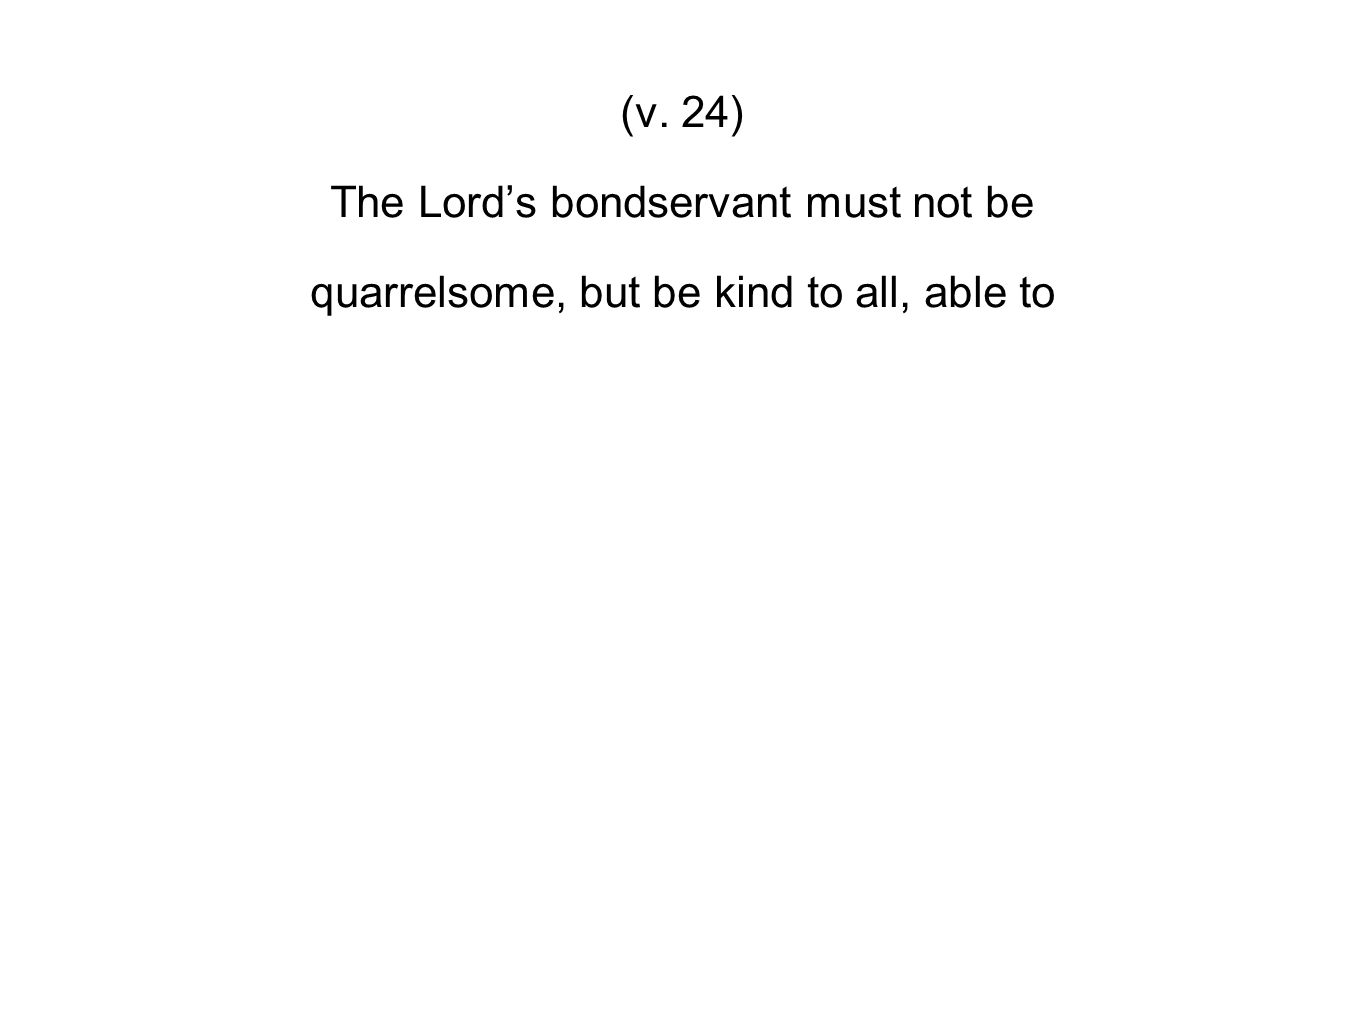 (v. 24) The Lord’s bondservant must not be quarrelsome, but be kind to all, able to